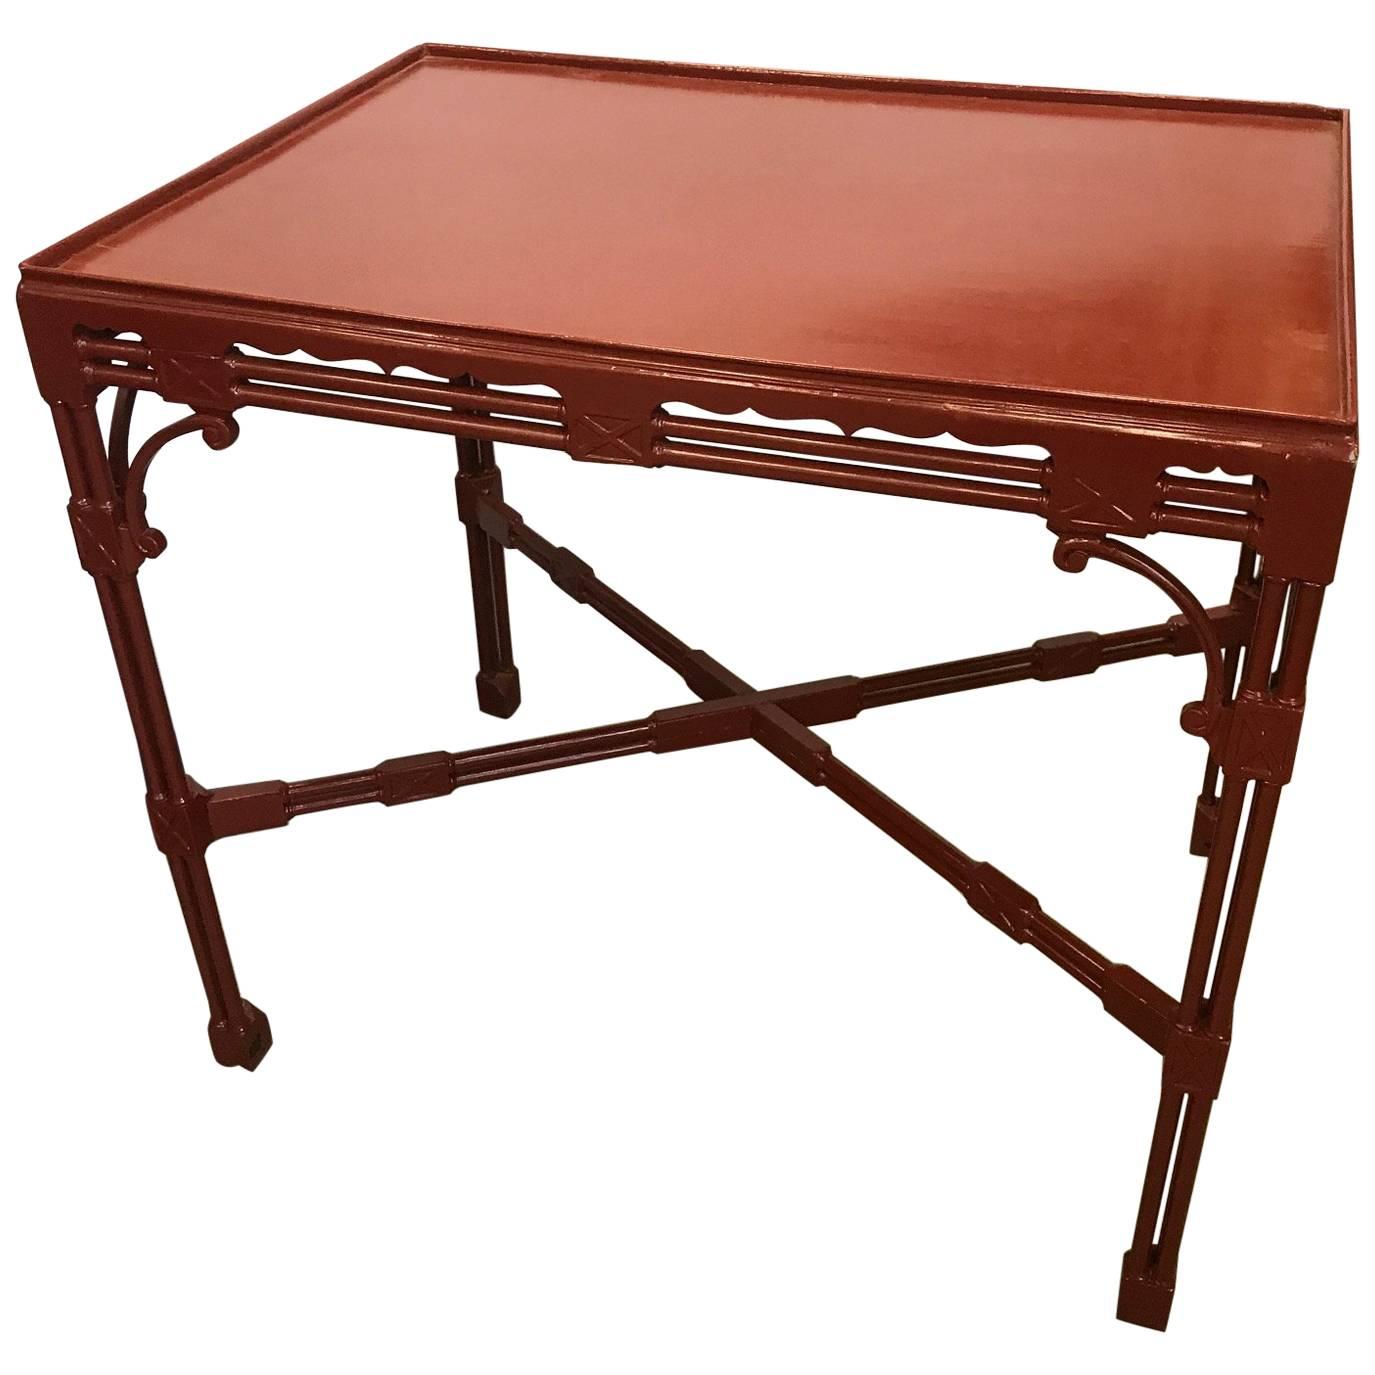 Chinese Chippendale Tea Table in Cinnabar Red